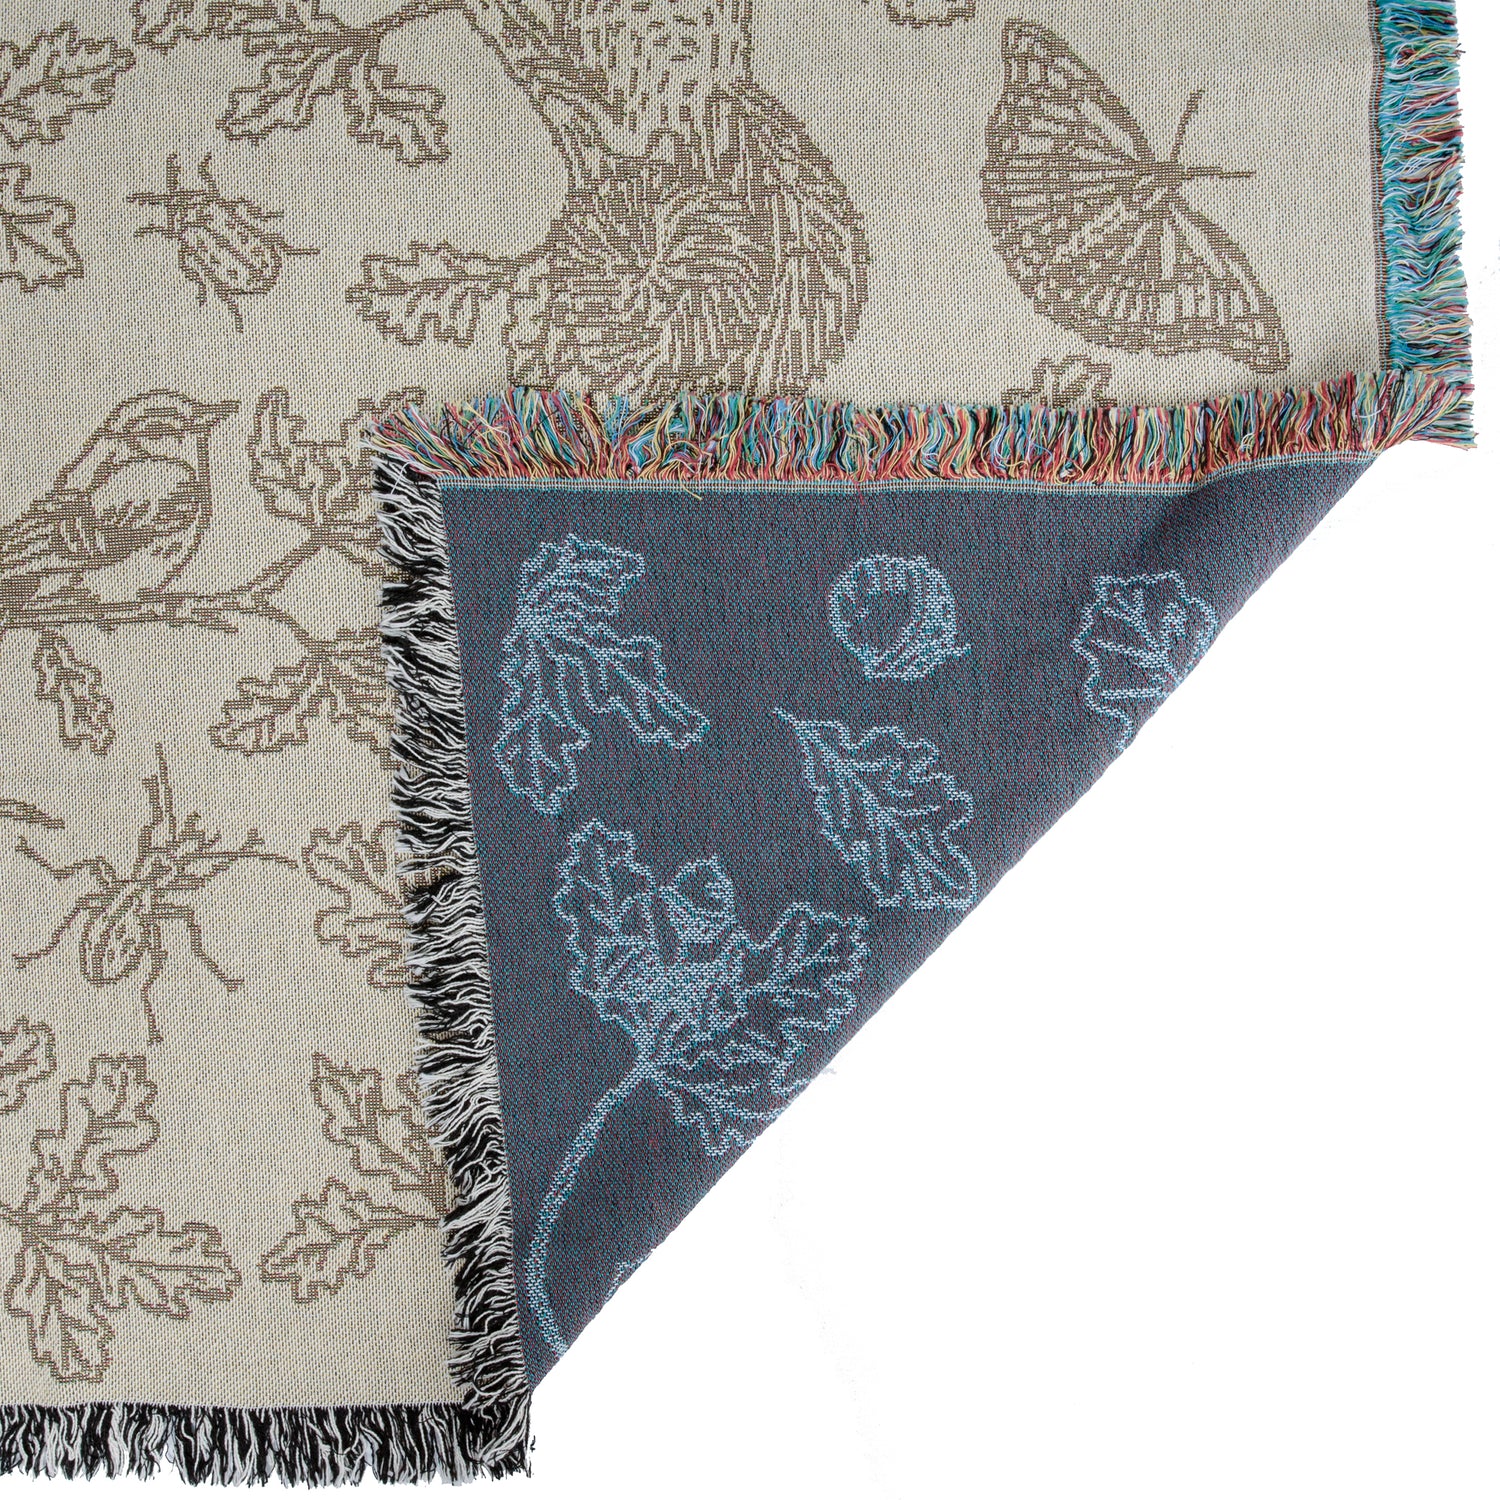 cream and blue two tone woven blanket featuring oak woodland butterfies and birds with fringe